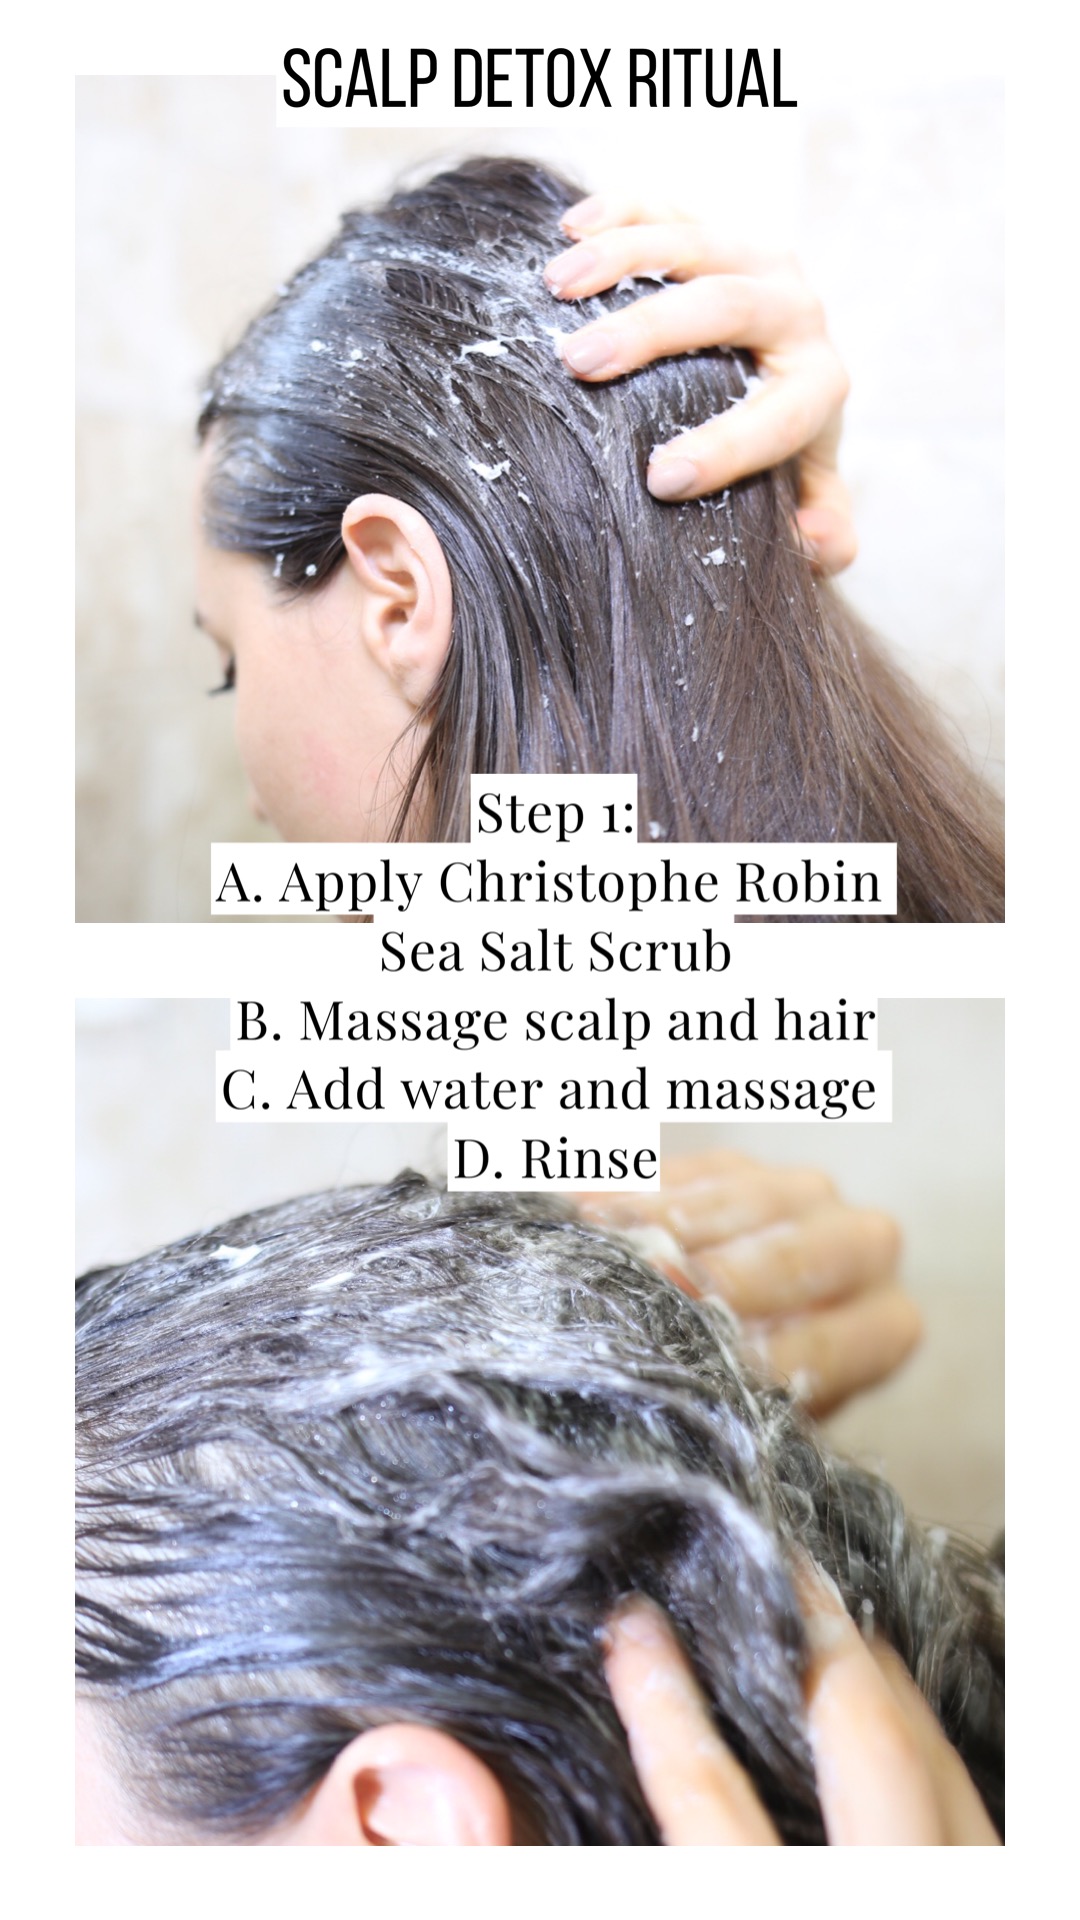 My Christophe Robin Scalp Detox Ritual with the purifying sea salt scrub and detangling gelee with sea minerals. Get all the details of my weekly hair ritual and 20% off and free shipping at ChristopheRobin.com with my discount code Julia20